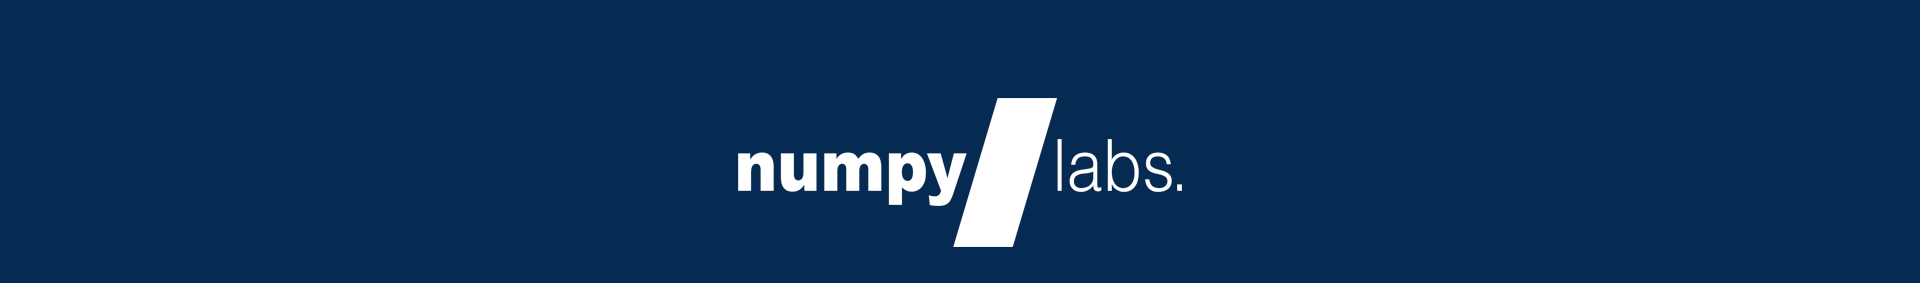 Numpy Labs's profile banner